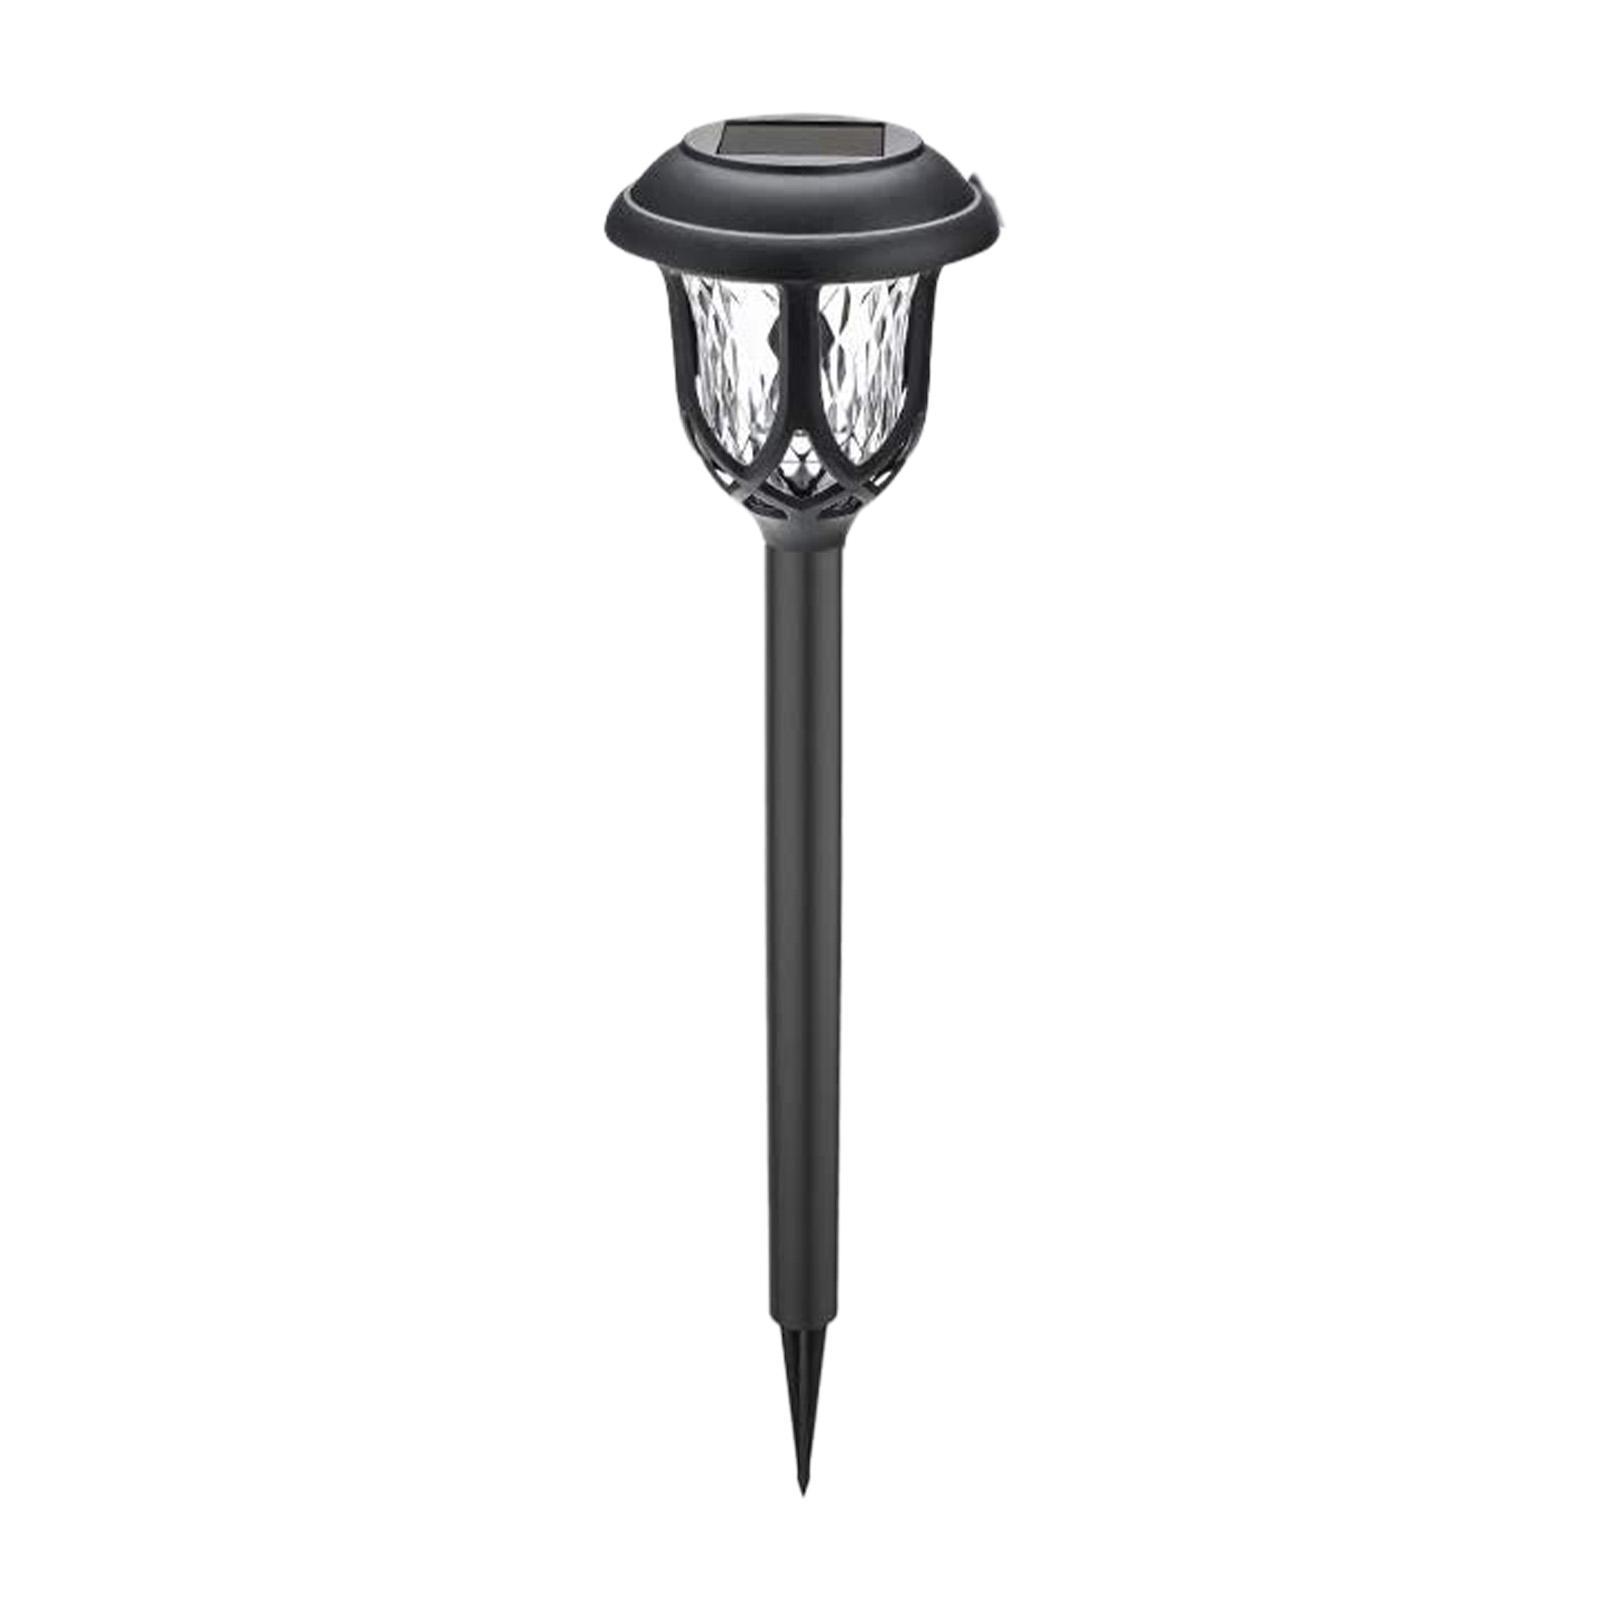 Solar Pathway Lights Outdoor 10 Pack Waterproof Auto On/Off Outdoor Solar Lights For Yard Landscape Path Lawn Patio Walkway